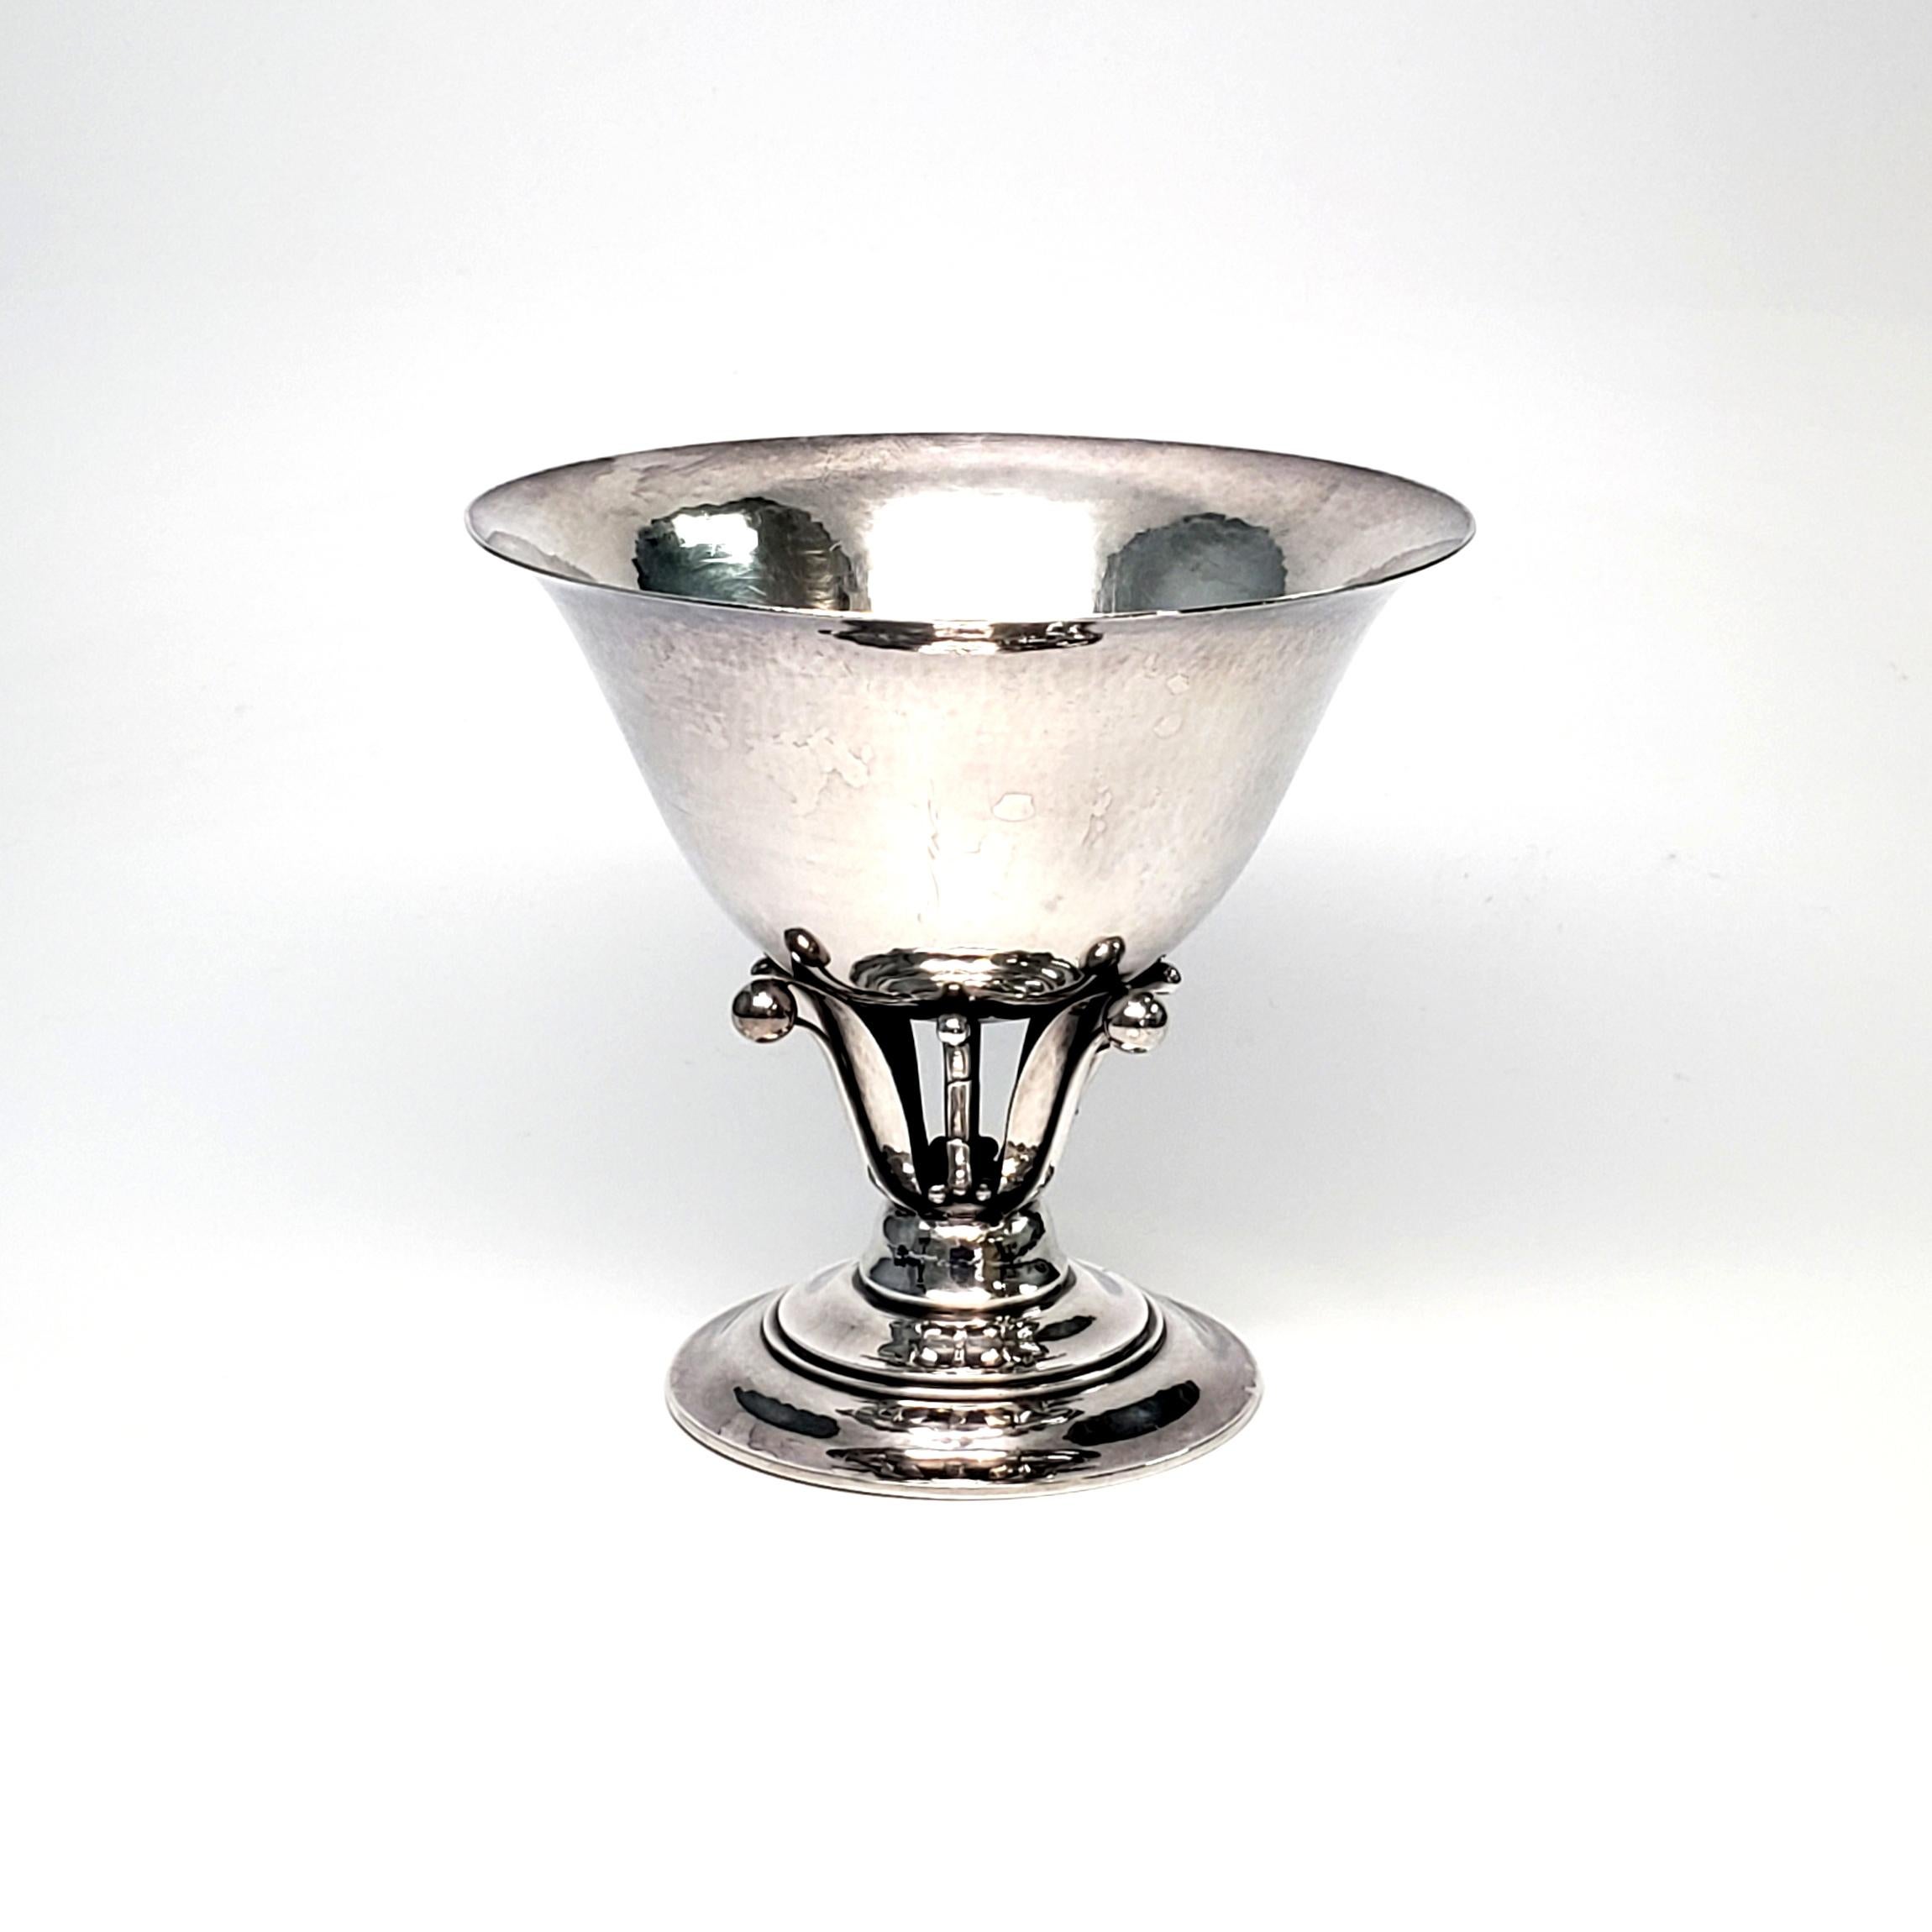 Vintage Georg Jensen sterling silver footed bowl #17B, circa 1930s.

Designed by Johan Rohde, the piece features a lightly hammered bowl held atop a floral pedestal on a stepped circular foot. The beaded oval hallmark dates the piece, circa